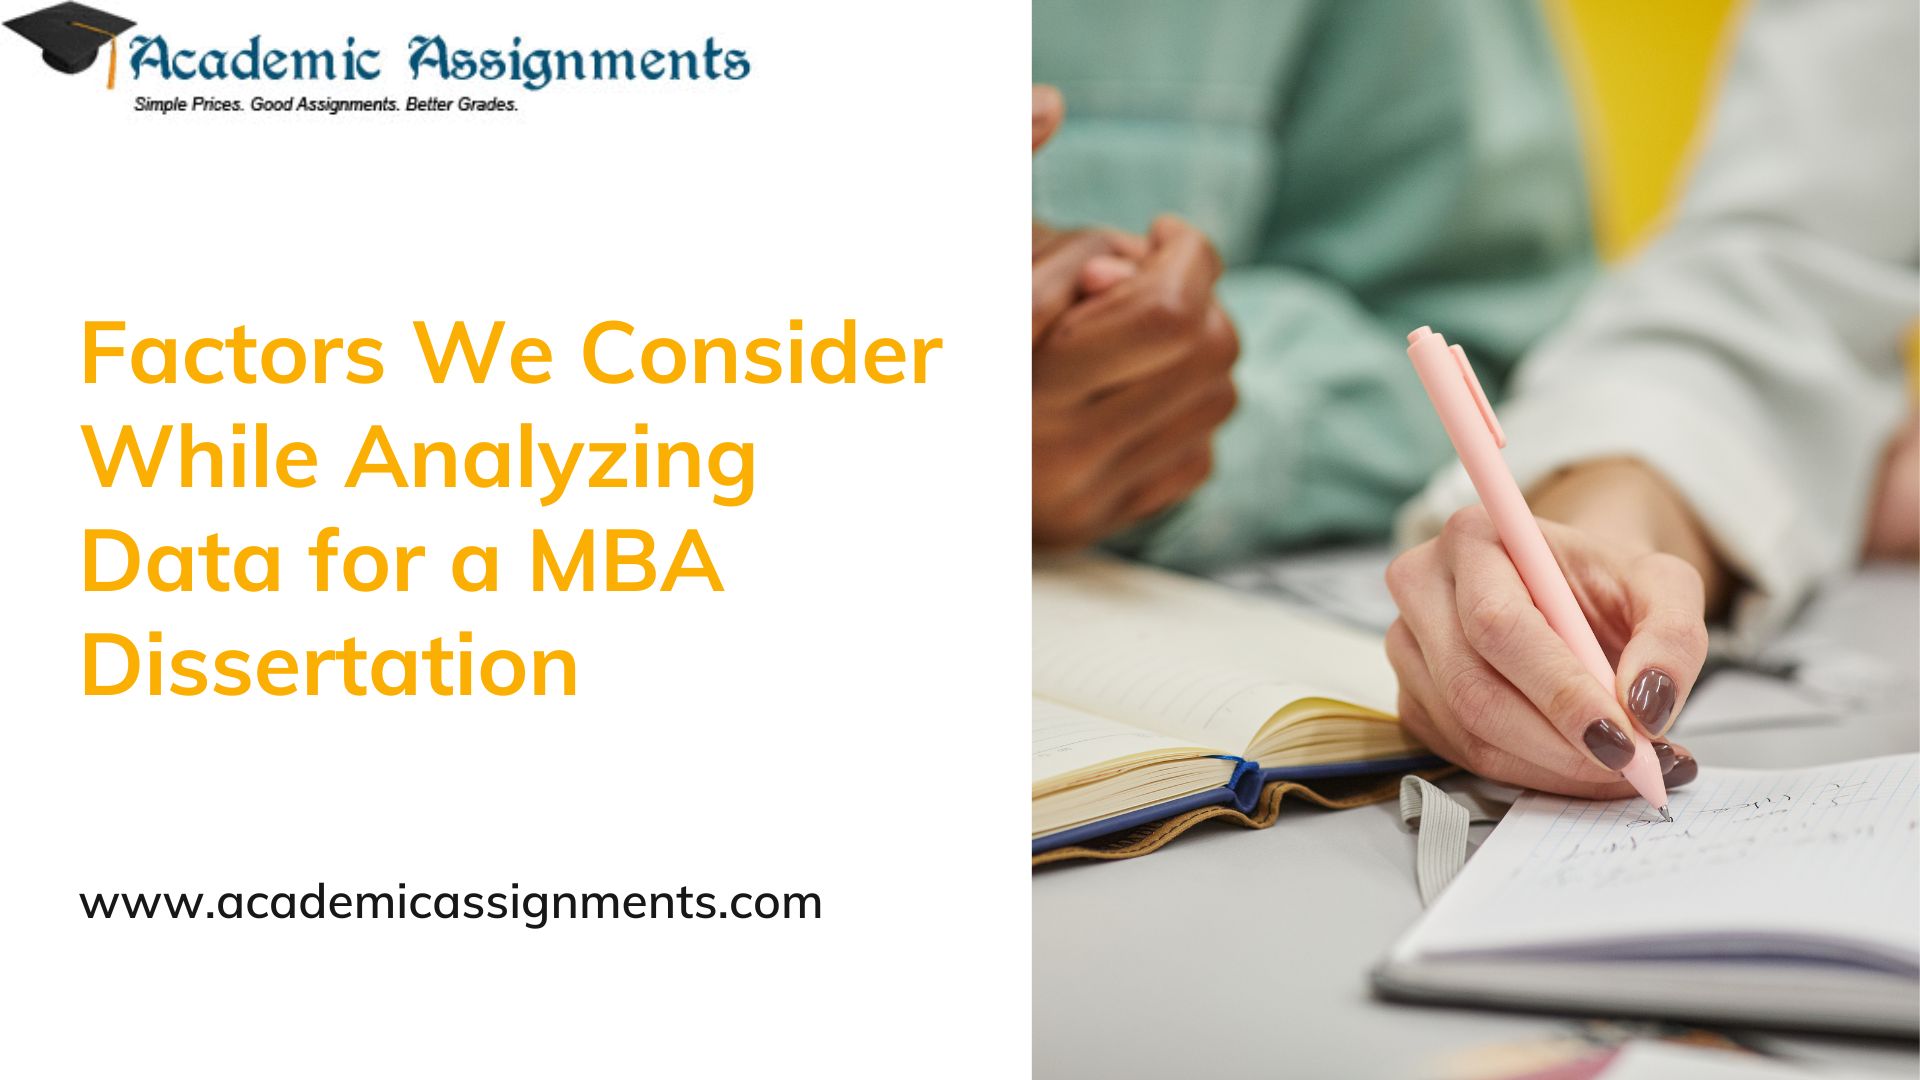 Factors We Consider While Analyzing Data for a MBA Dissertation